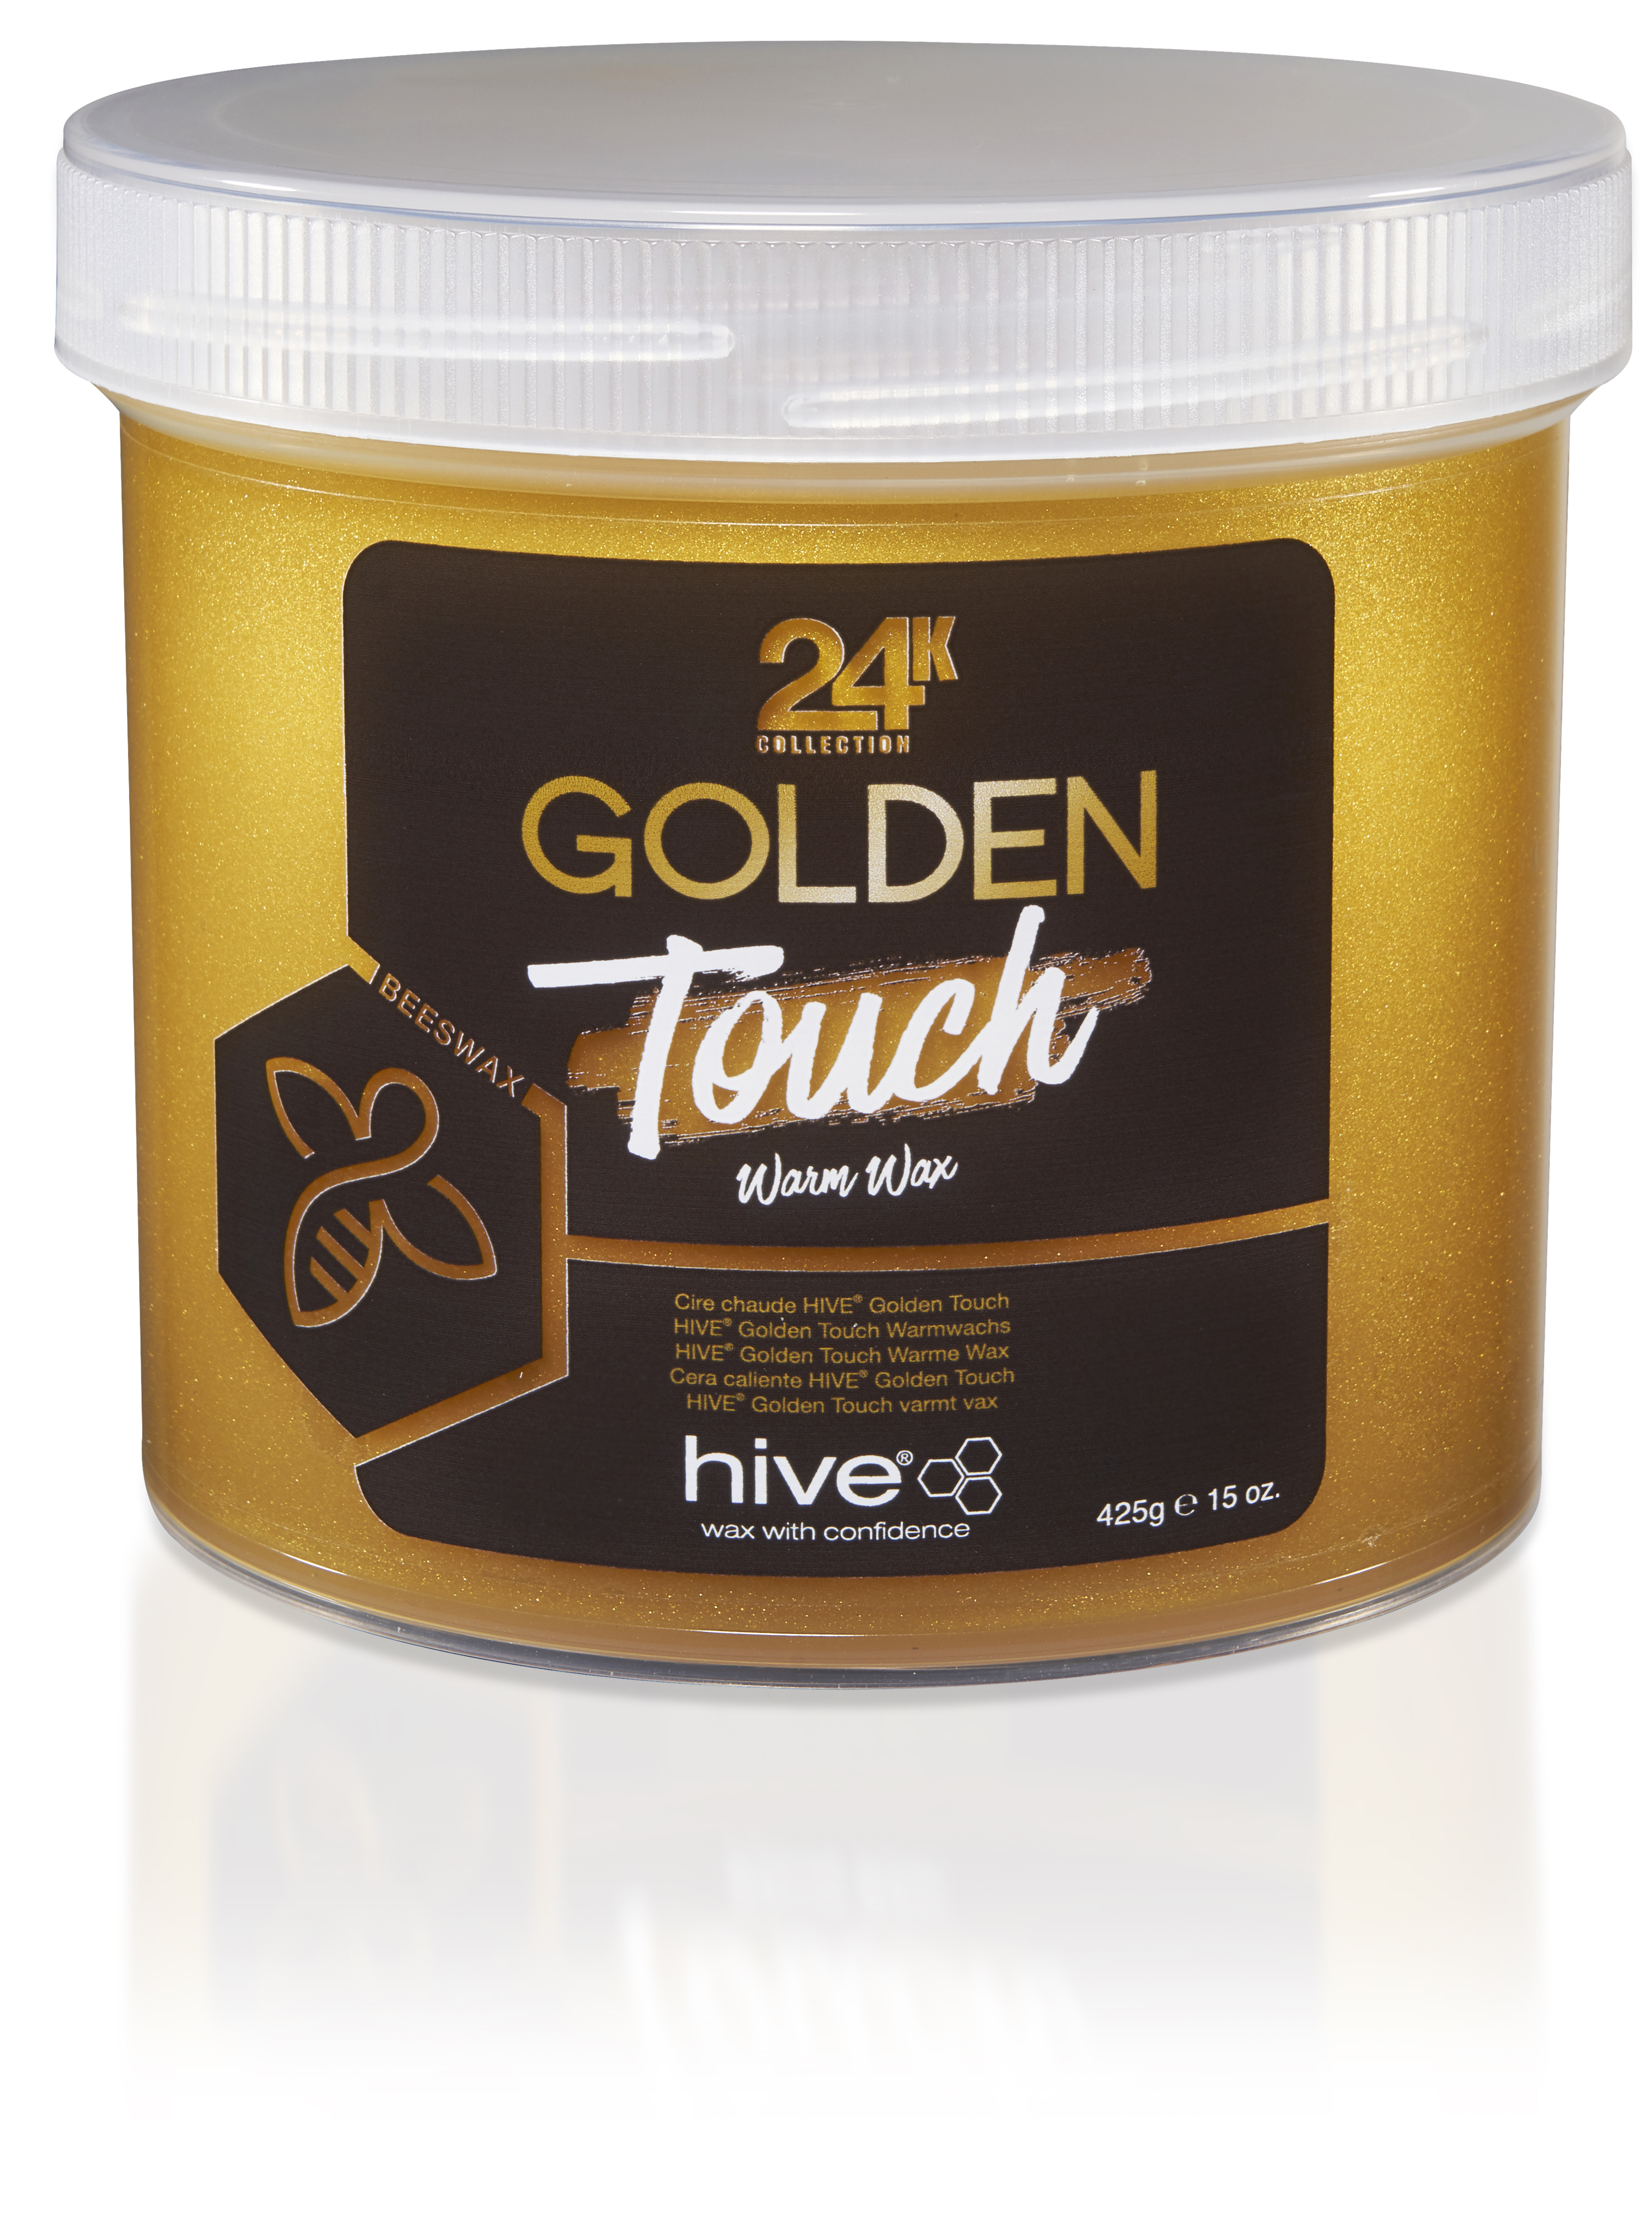 Hive Golden Touch Warm Wax hair removal 